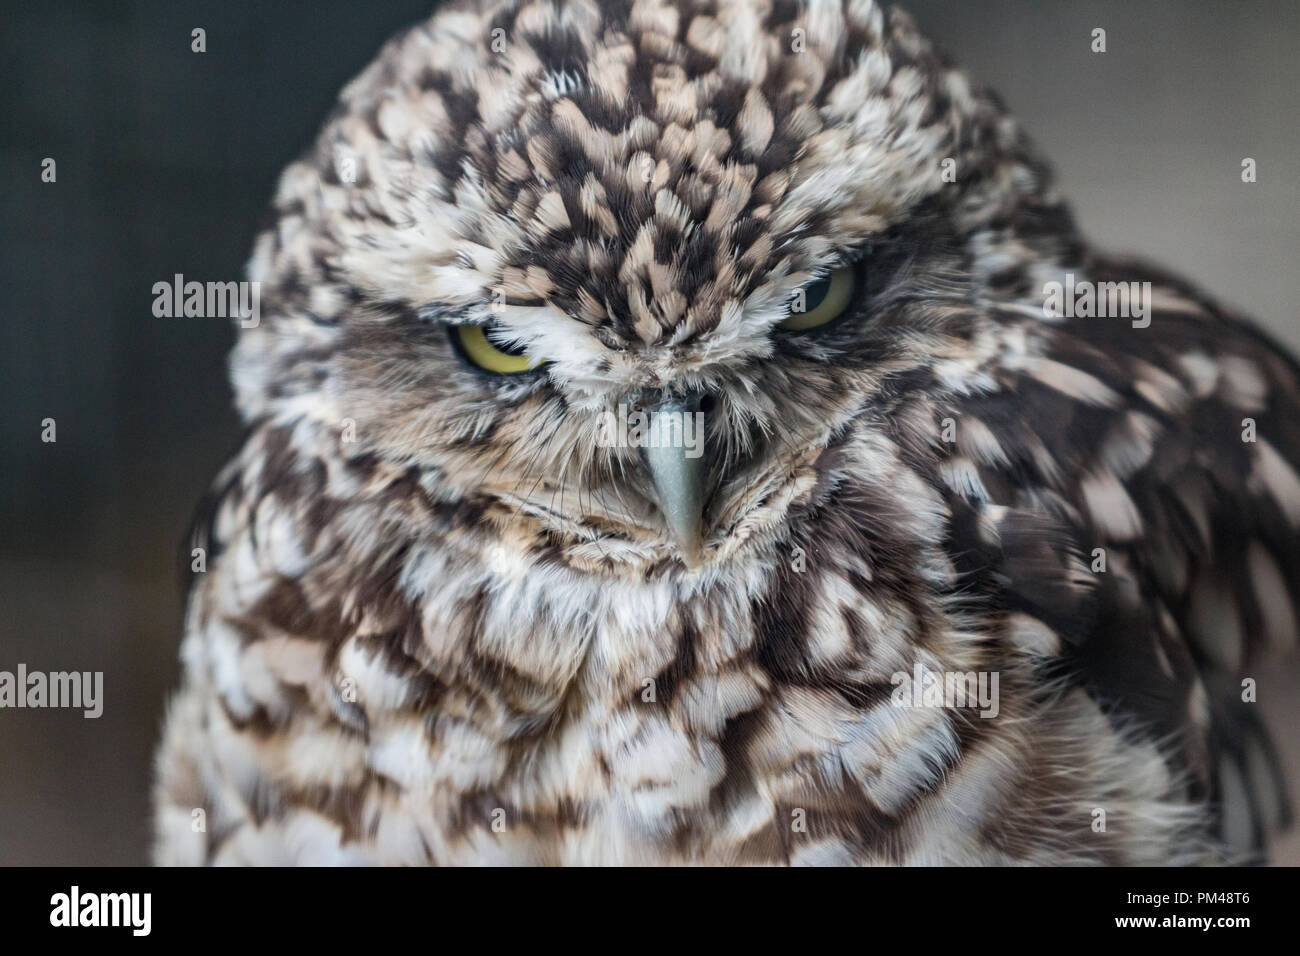 Close up headshot of a angry looking little owl Stock Photo